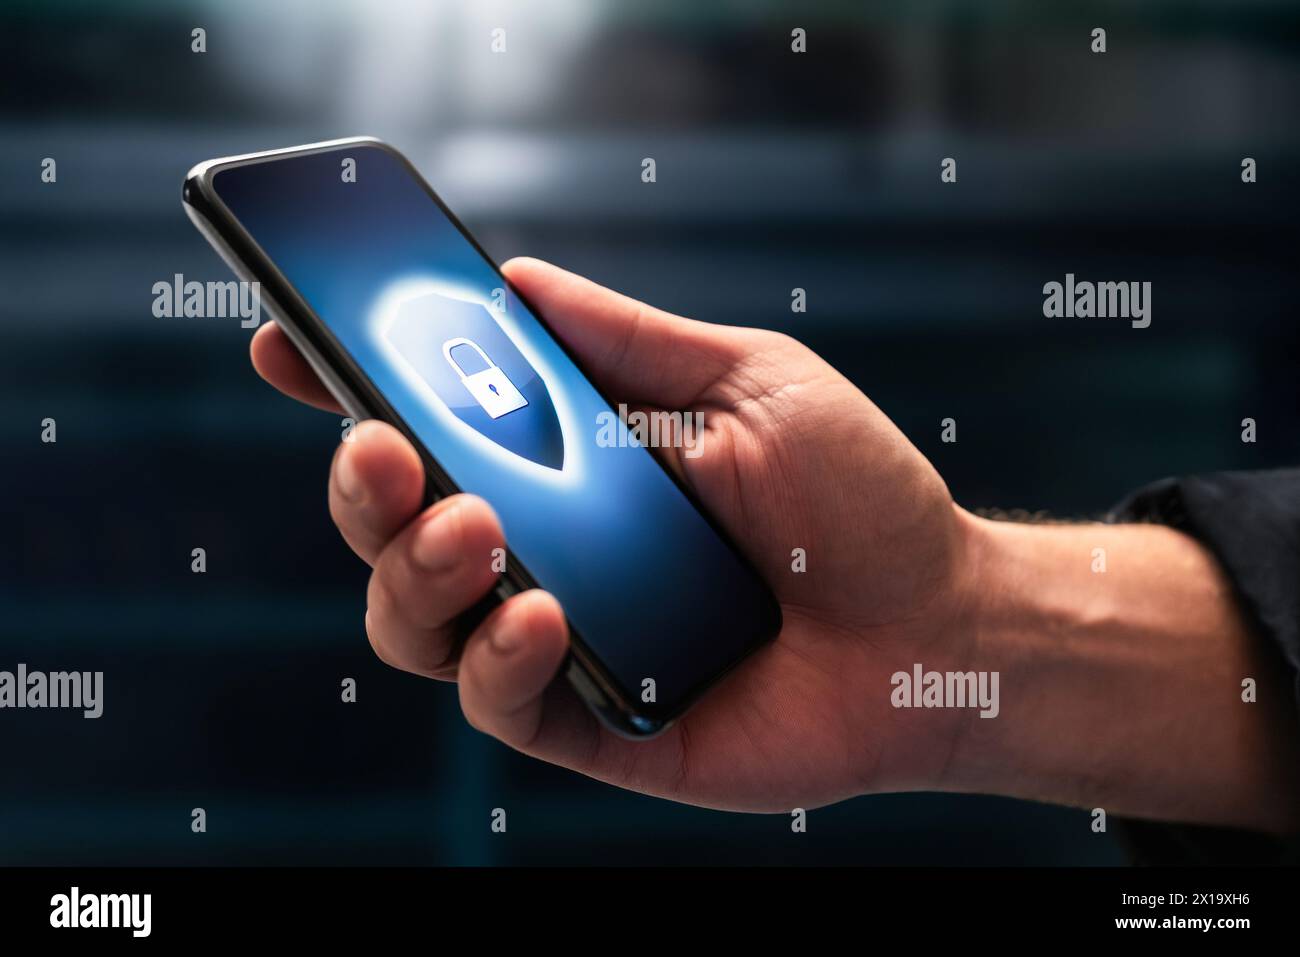 Phone data security protect from scam and mobile crime. Online privacy and cyber safety with cell app password. Spy, spyware or identity theft. Stock Photo